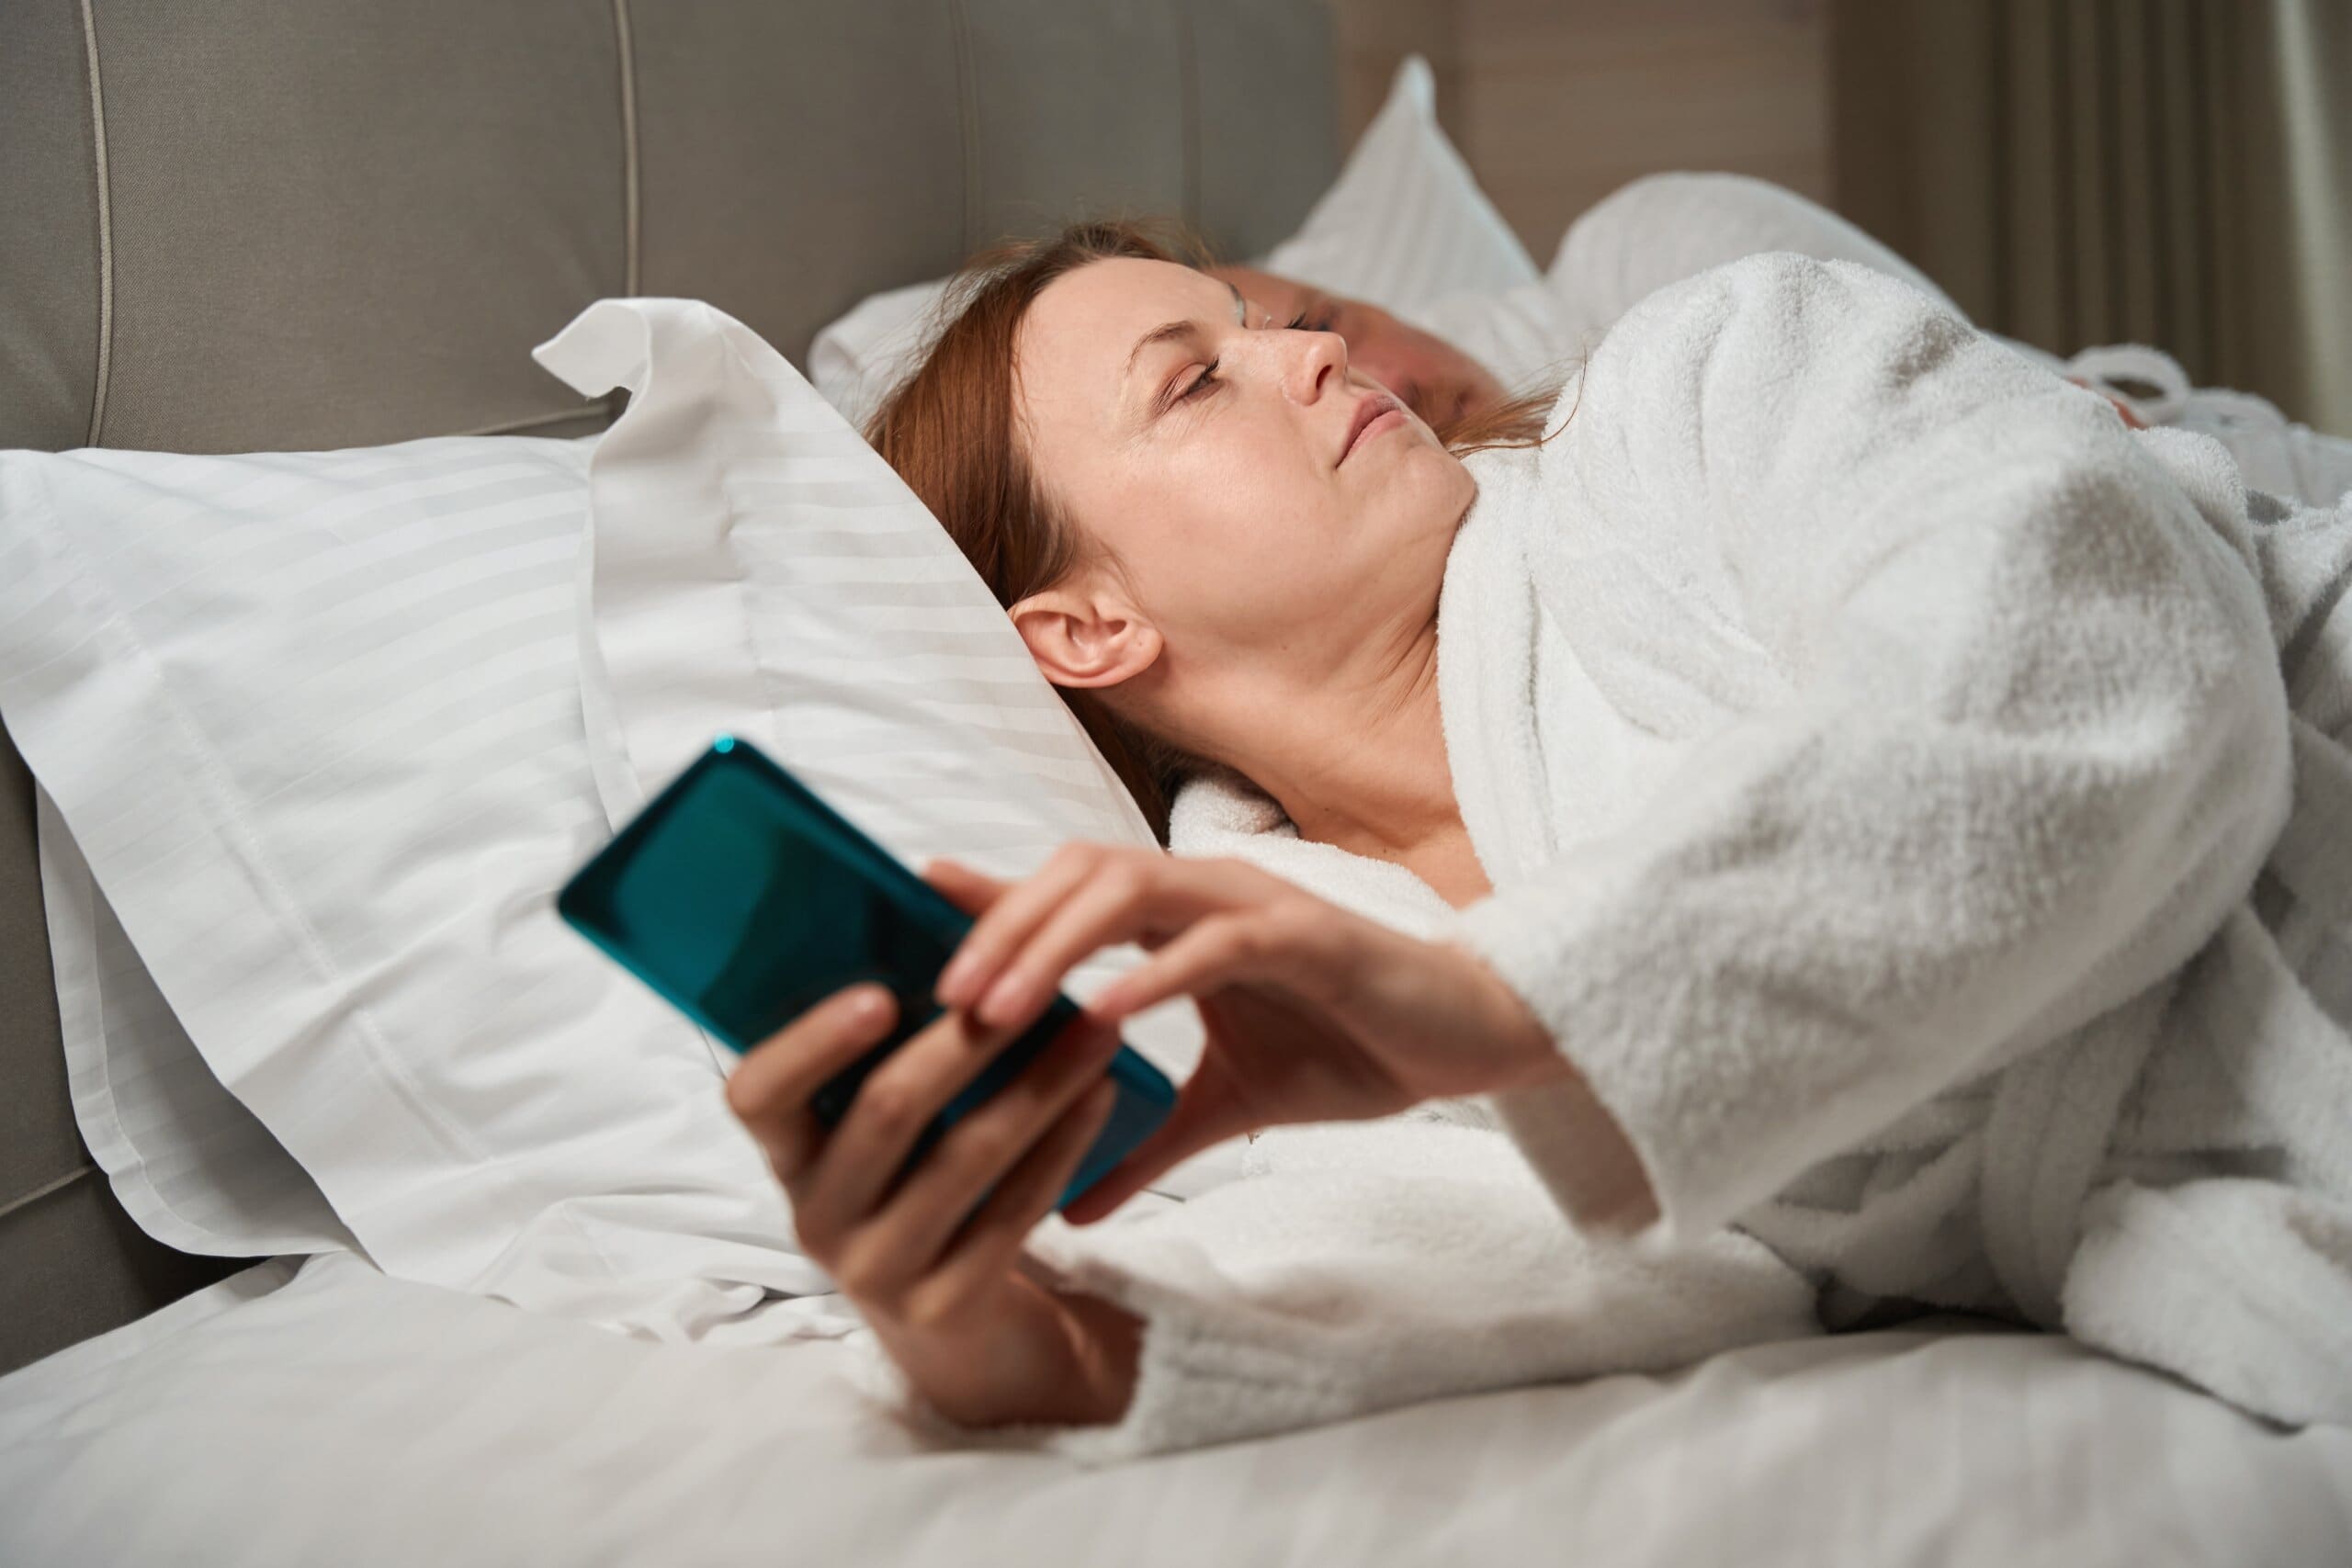 Lady lying in bed on her phone with partner lying next to her.